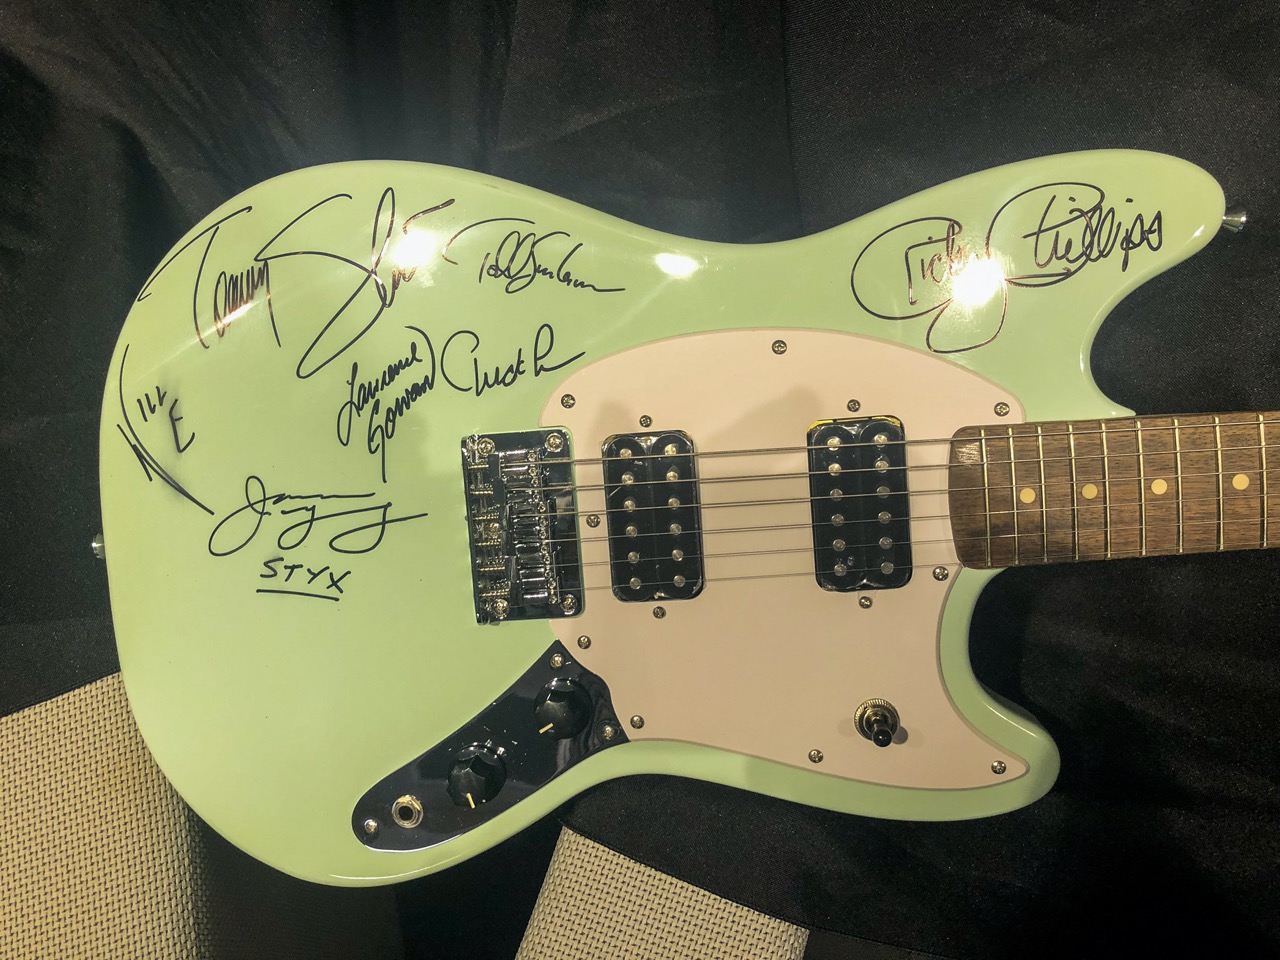 STYX autographed guitar